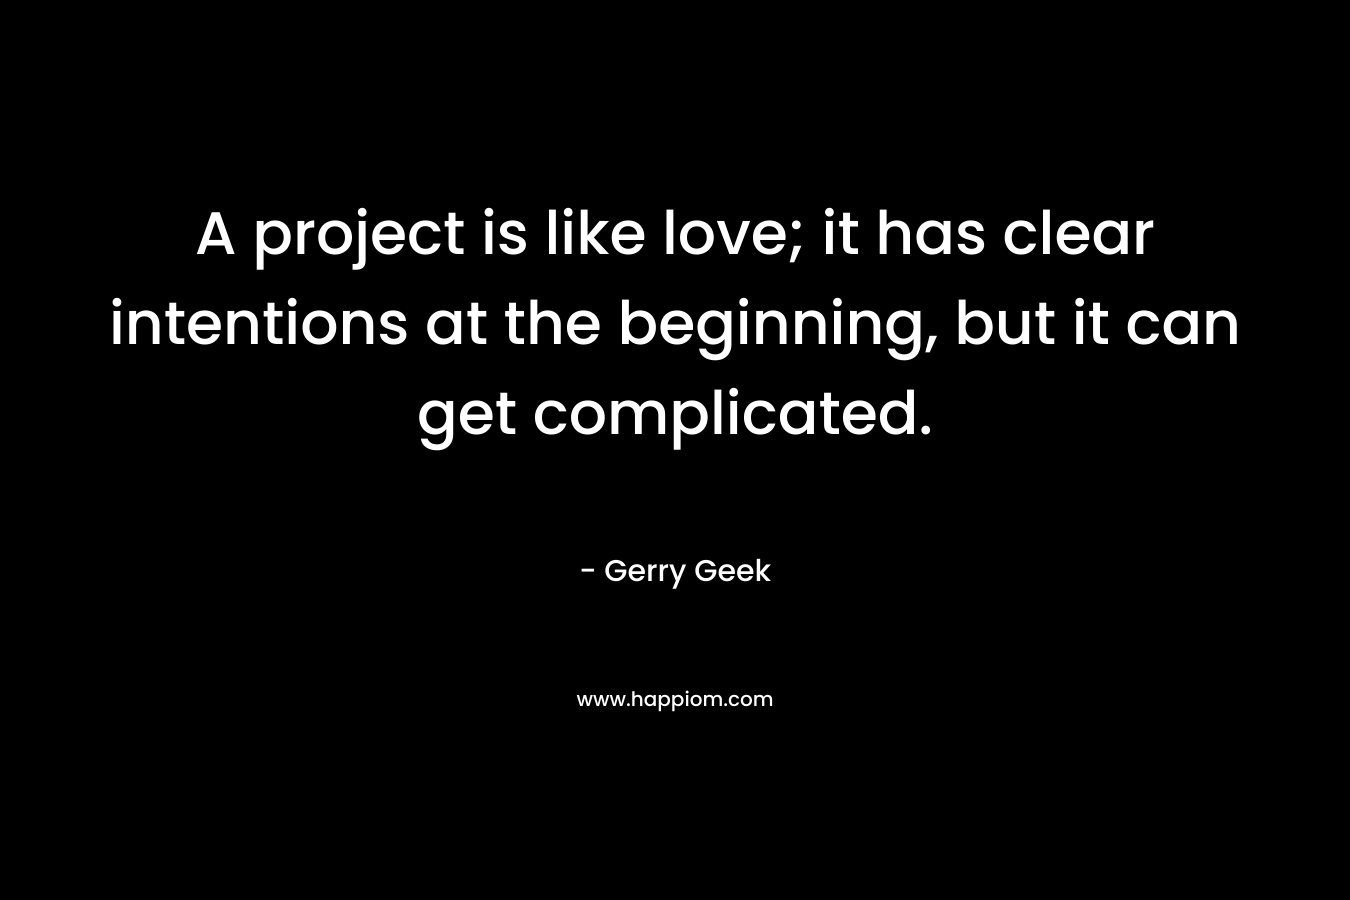 A project is like love; it has clear intentions at the beginning, but it can get complicated. – Gerry Geek